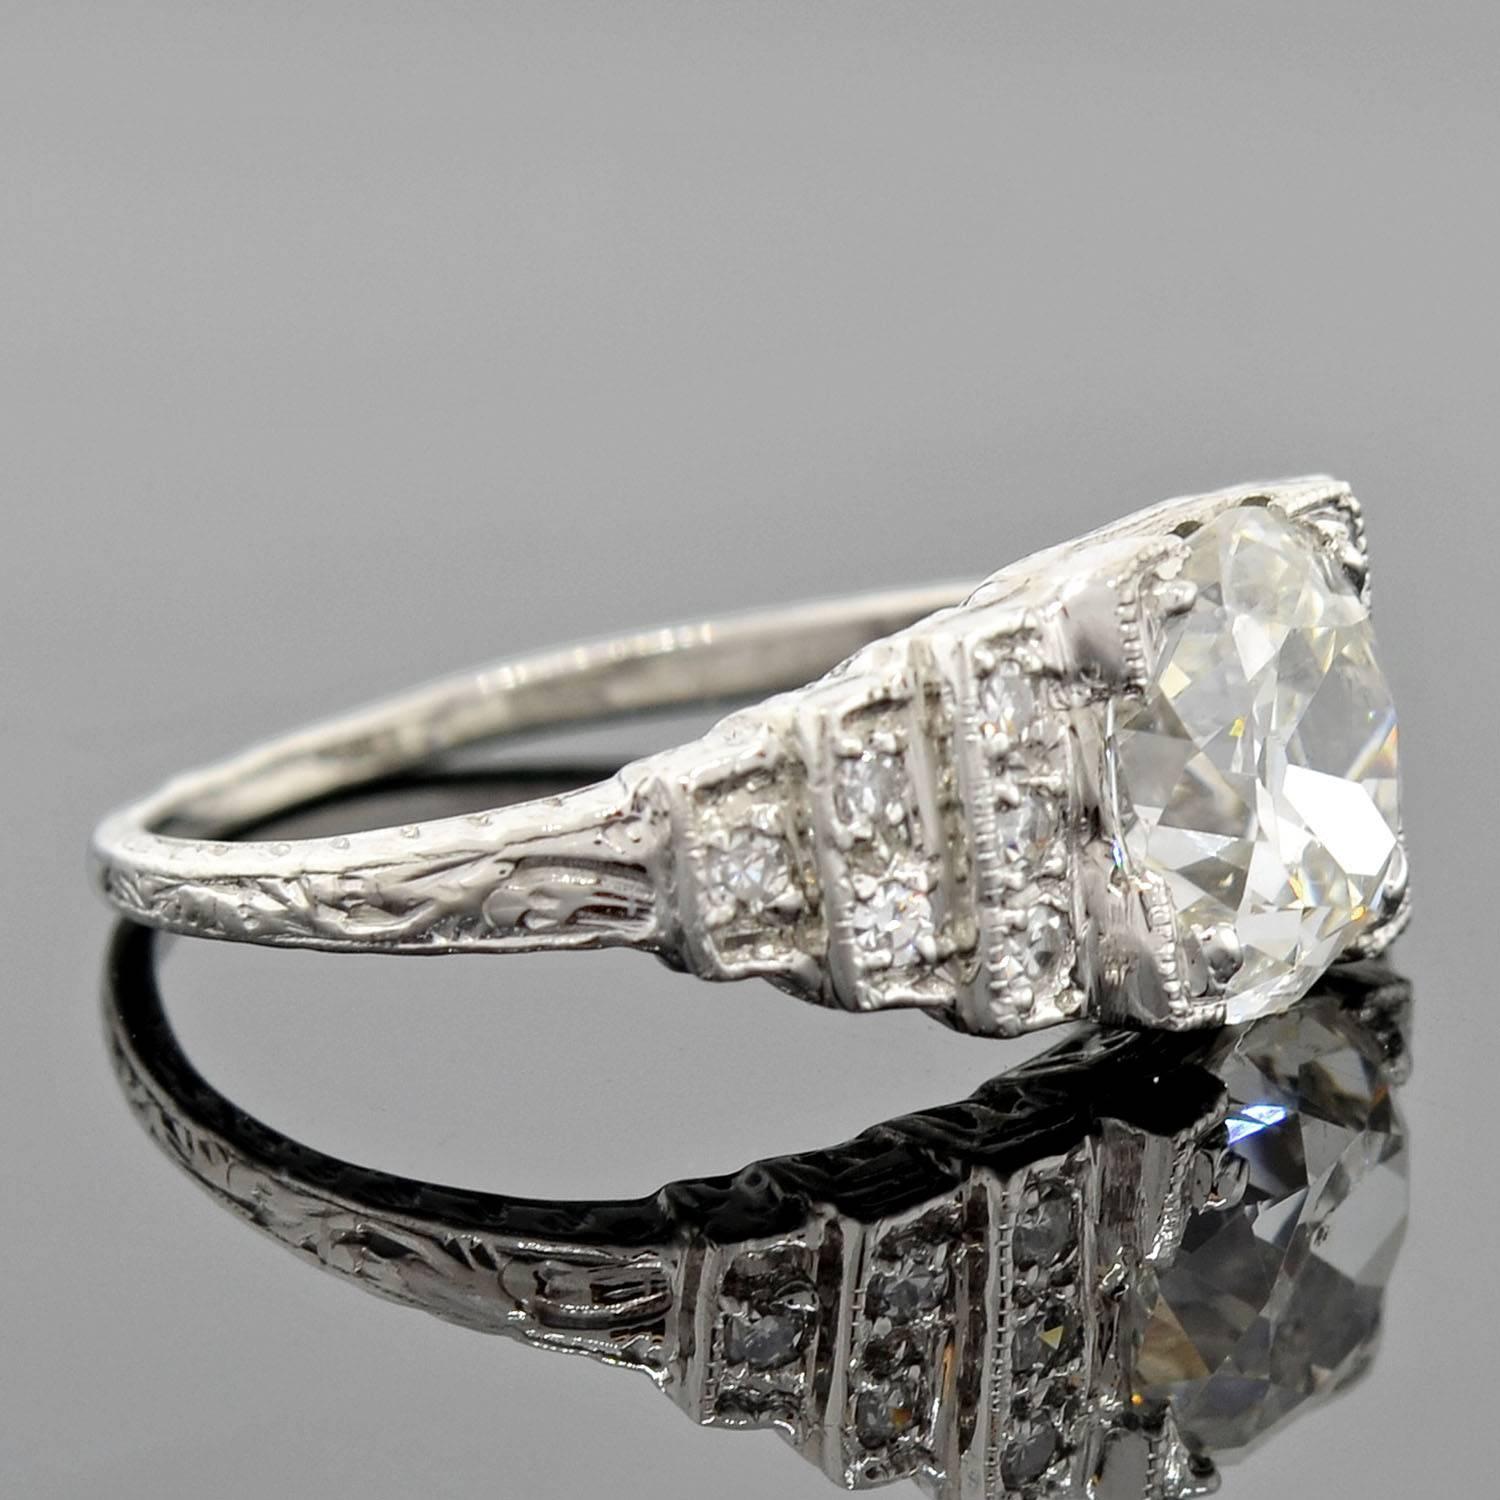 An exquisite diamond engagement ring from the Art Deco (ca1920) era! Made of platinum, this beautiful piece has a lovely 